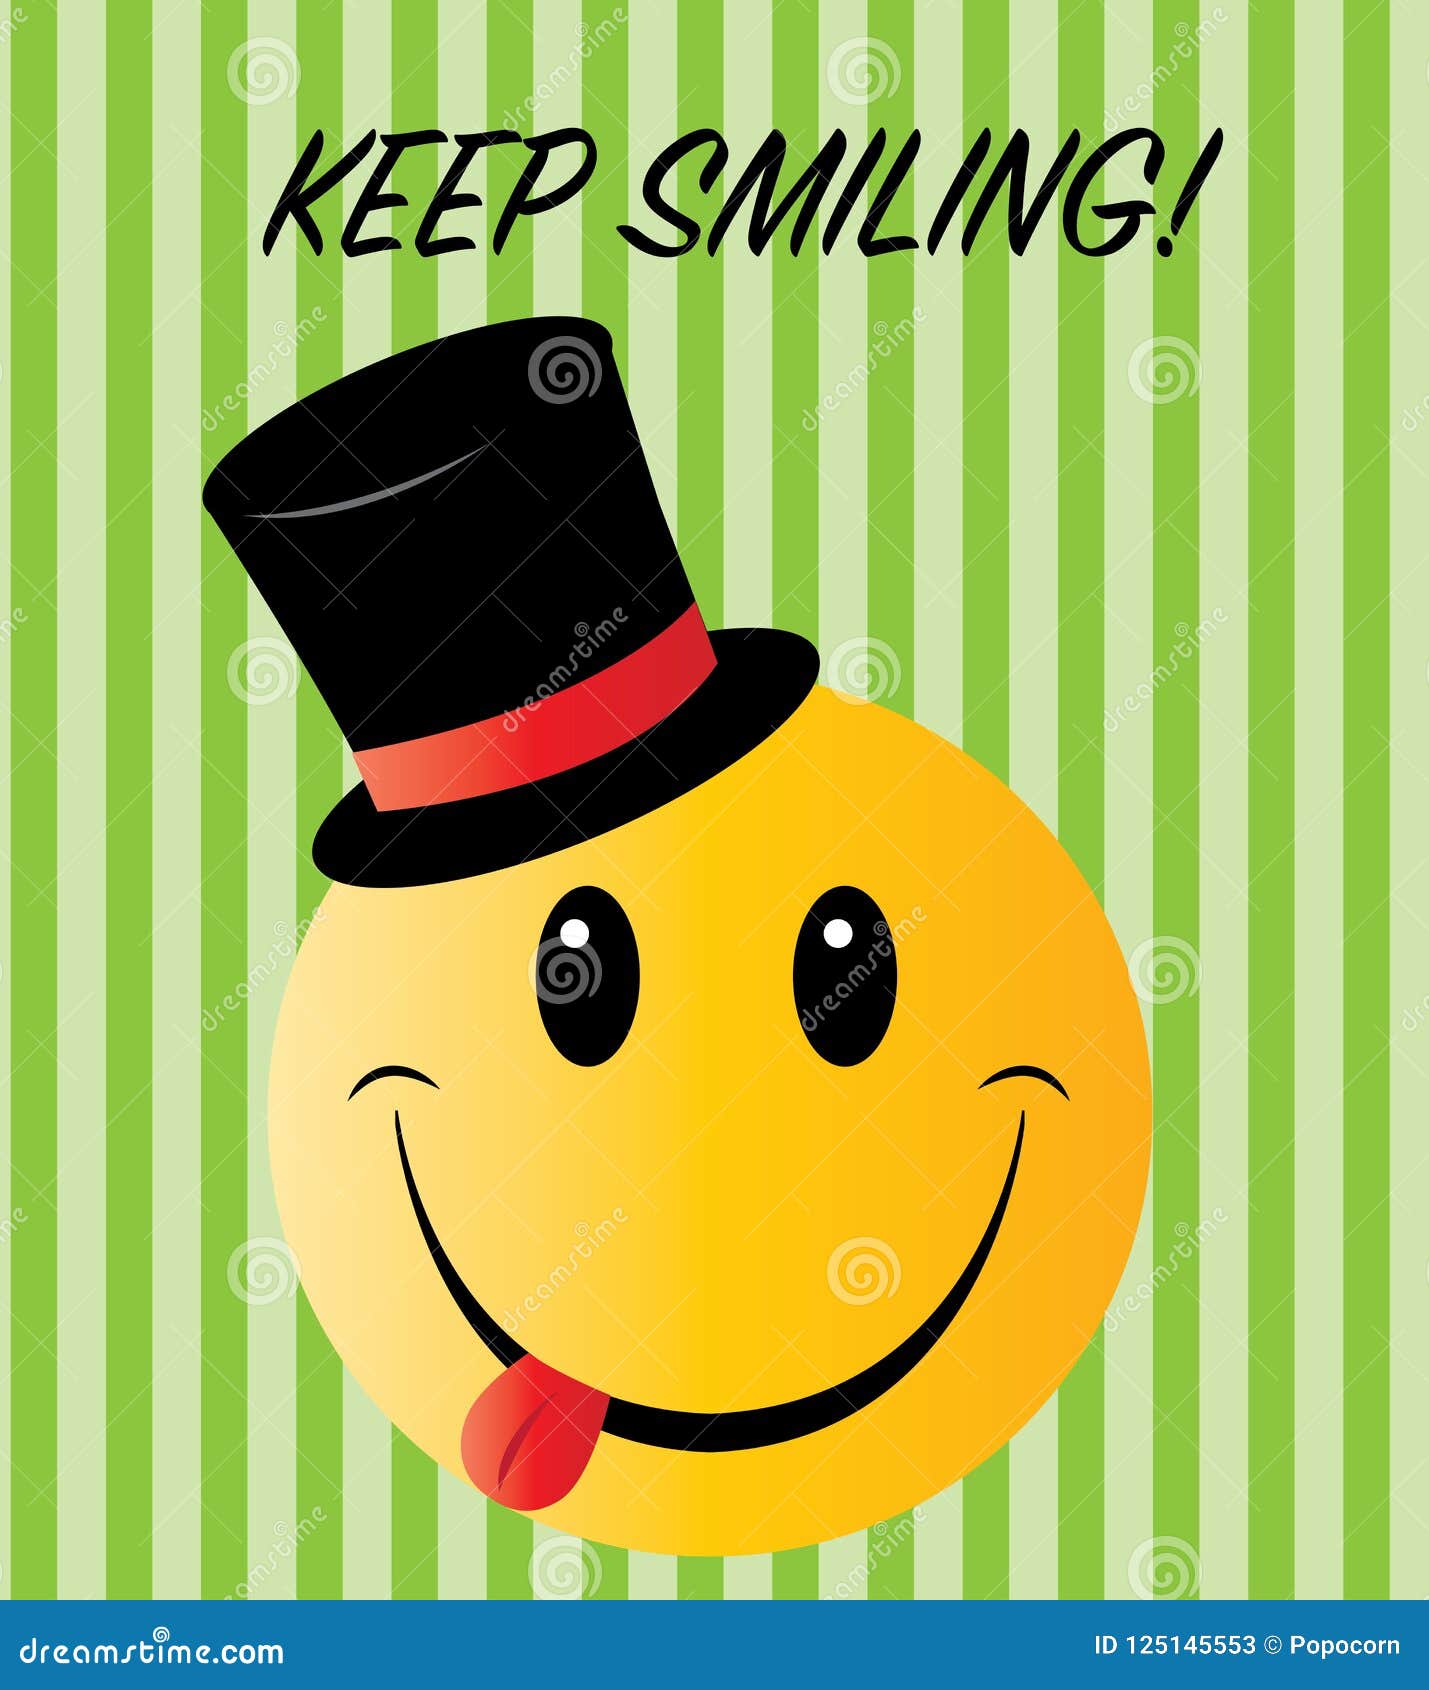 Keep Smiling Greeting or Other Message Stock Illustration ...